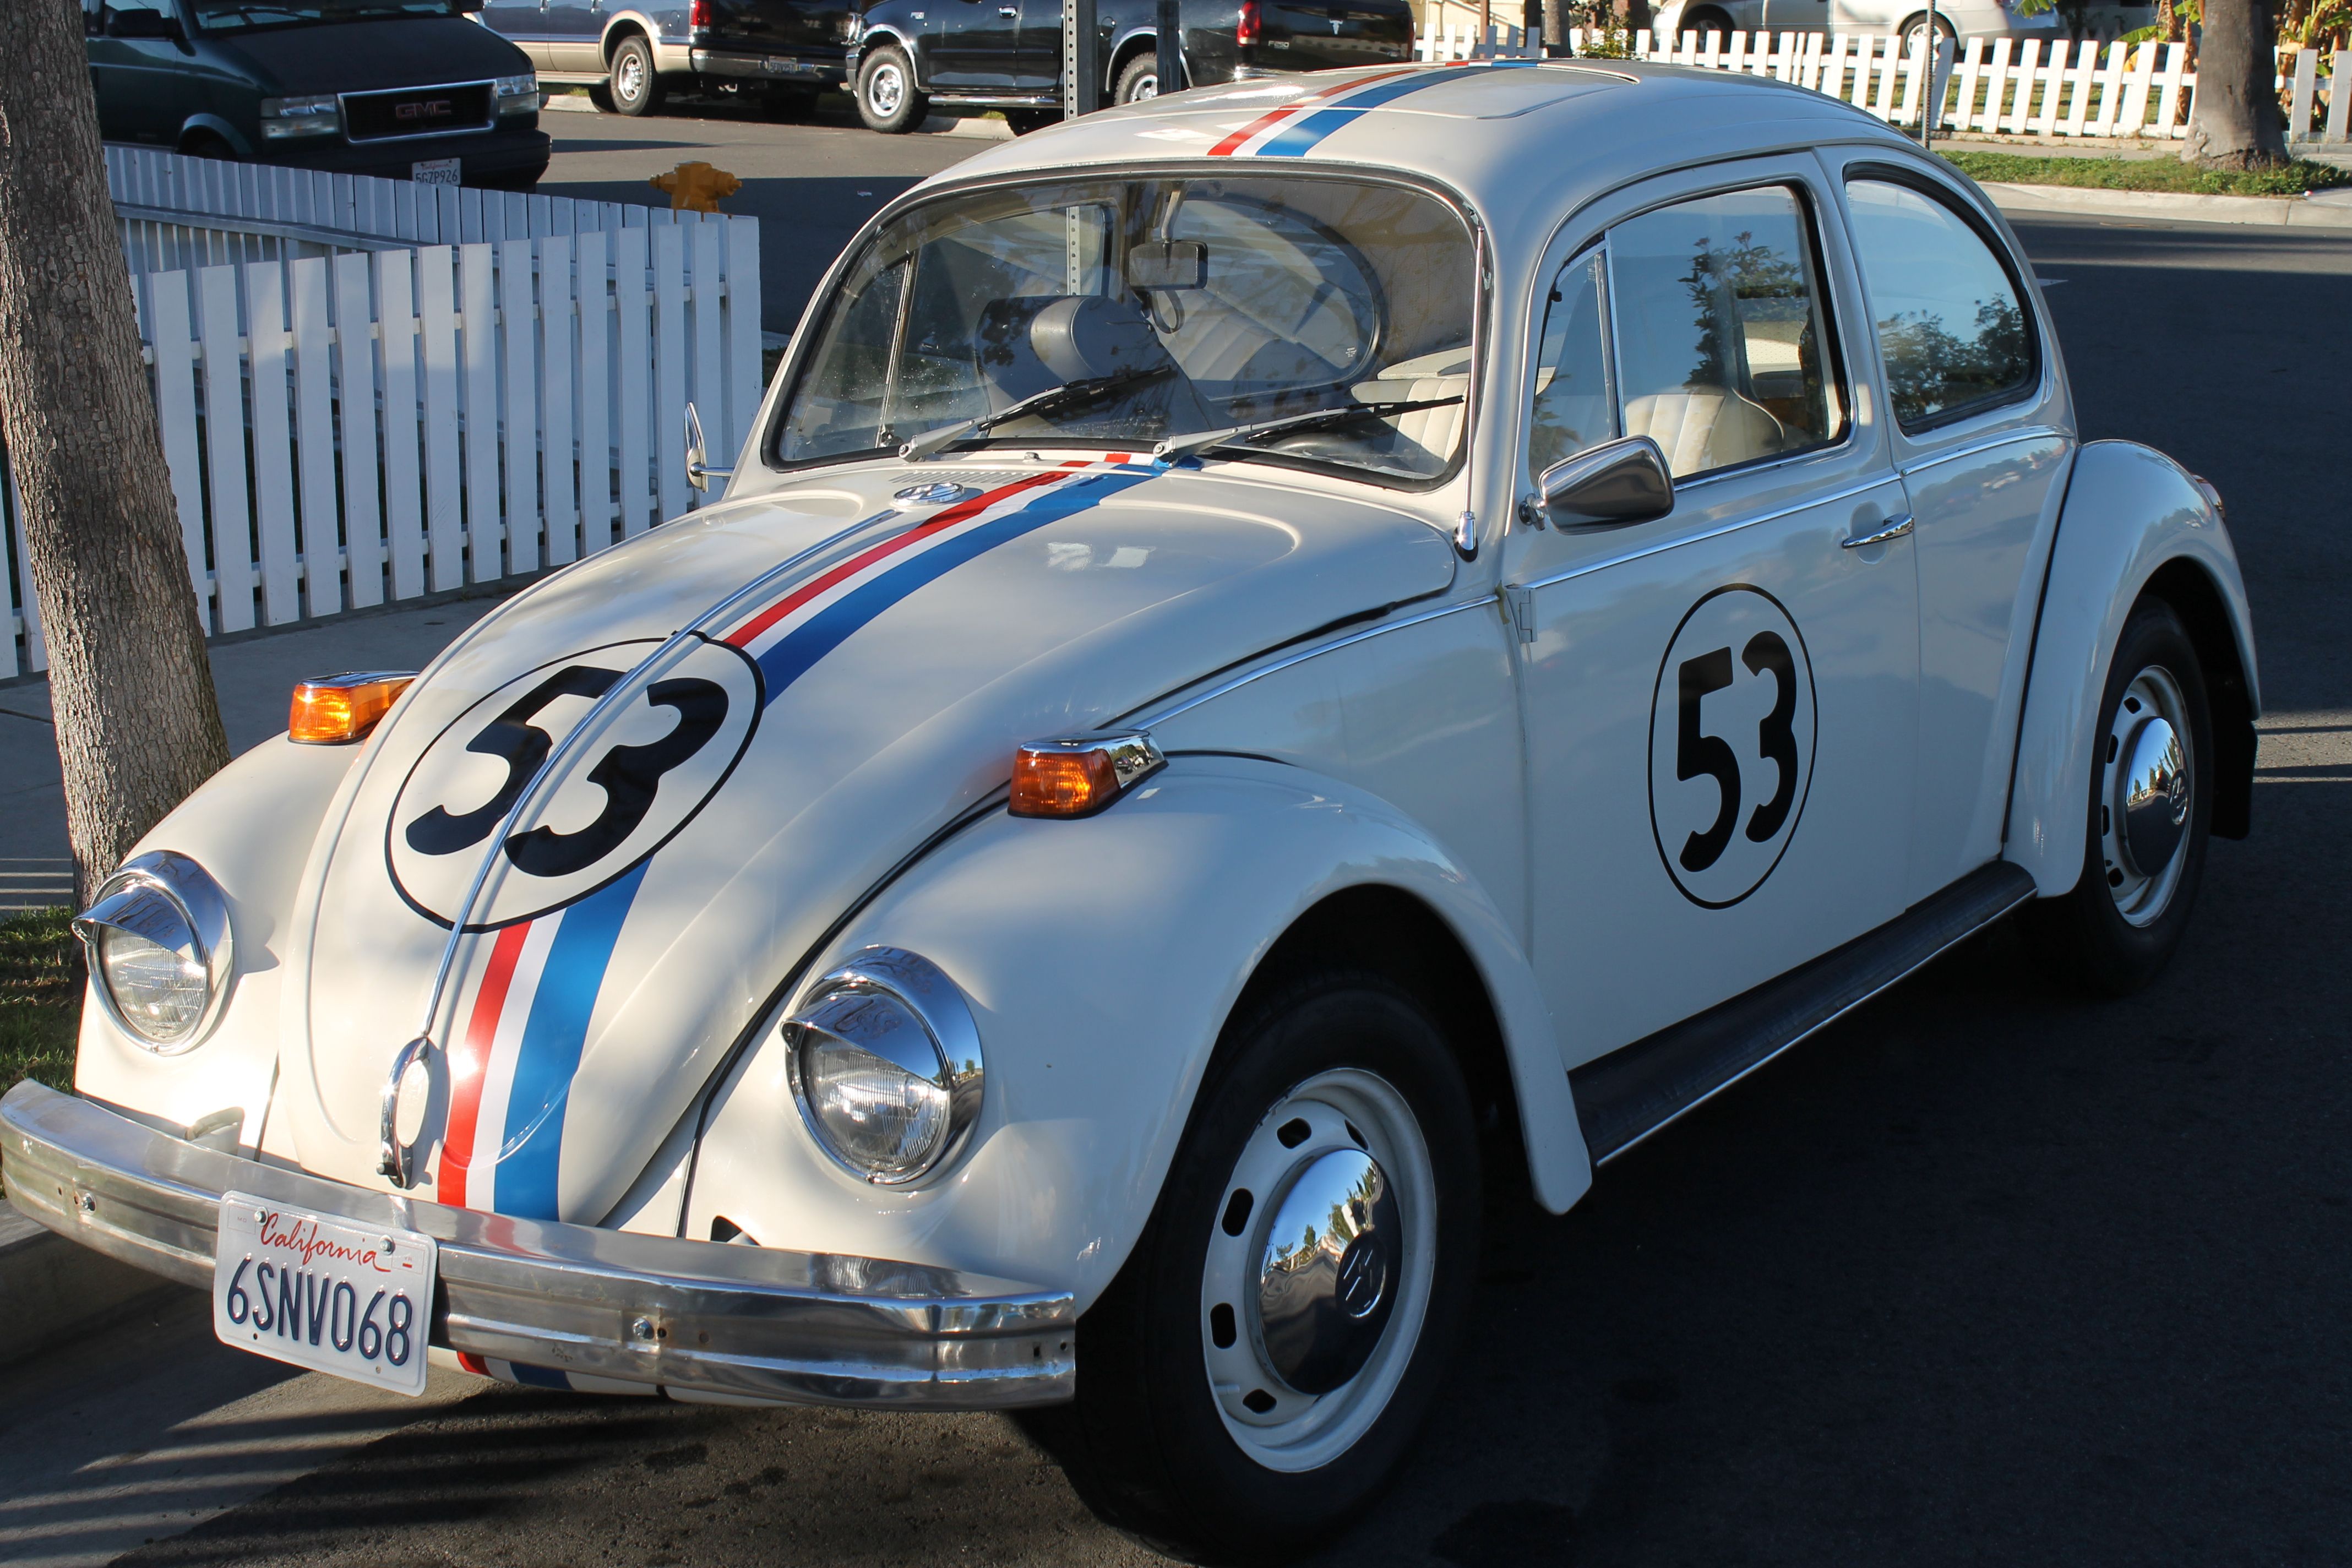 The original Herbie the Love Bug is a 1963 Beetle. Cars From